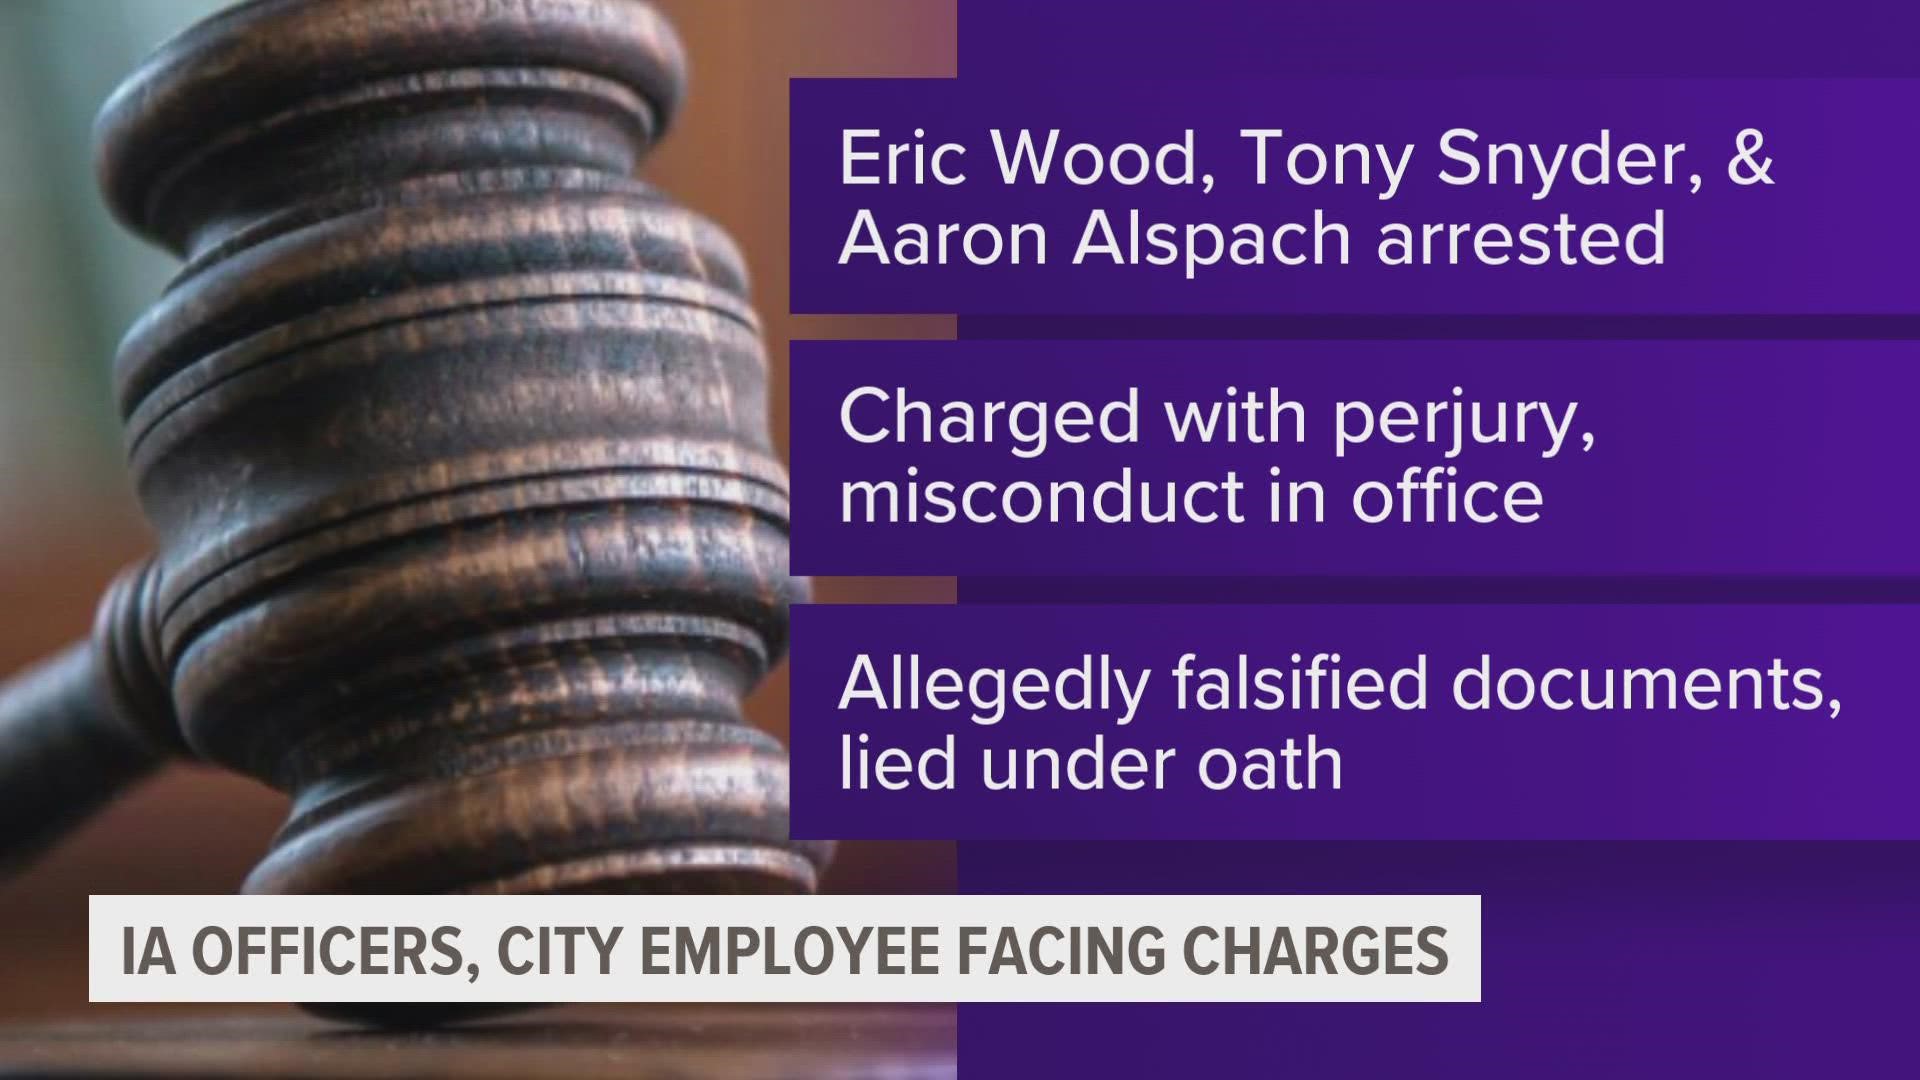 Administrator Eric Wood and former officers Tony Snyder and Aaron Alspach are all charged with felonious misconduct in office and perjury in Calhoun County.